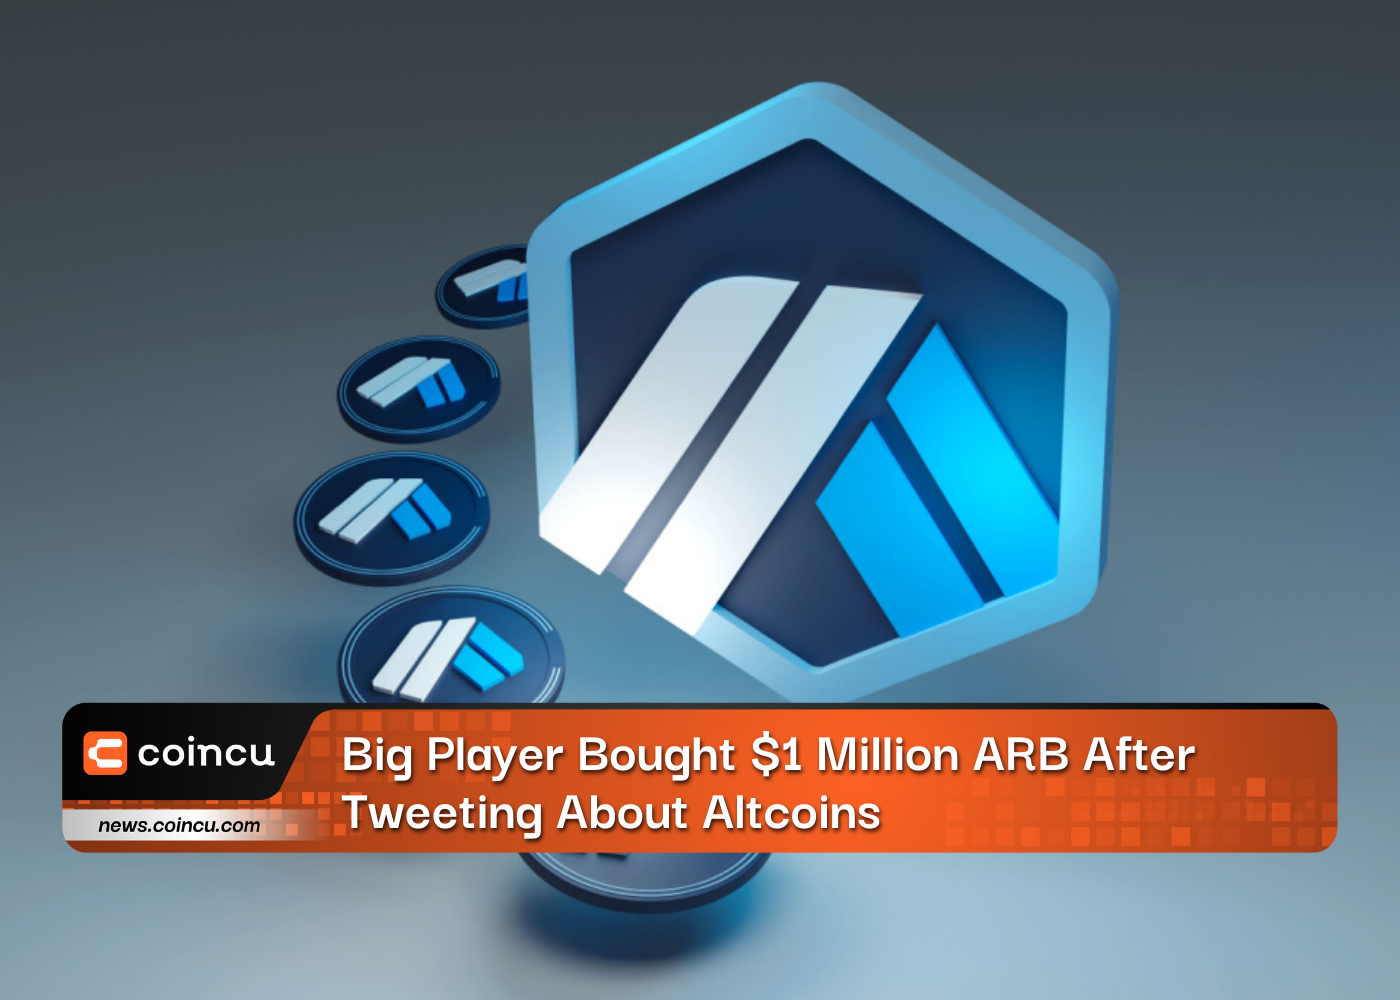 Big Player Bought $1 Million ARB After Tweeting About Altcoins